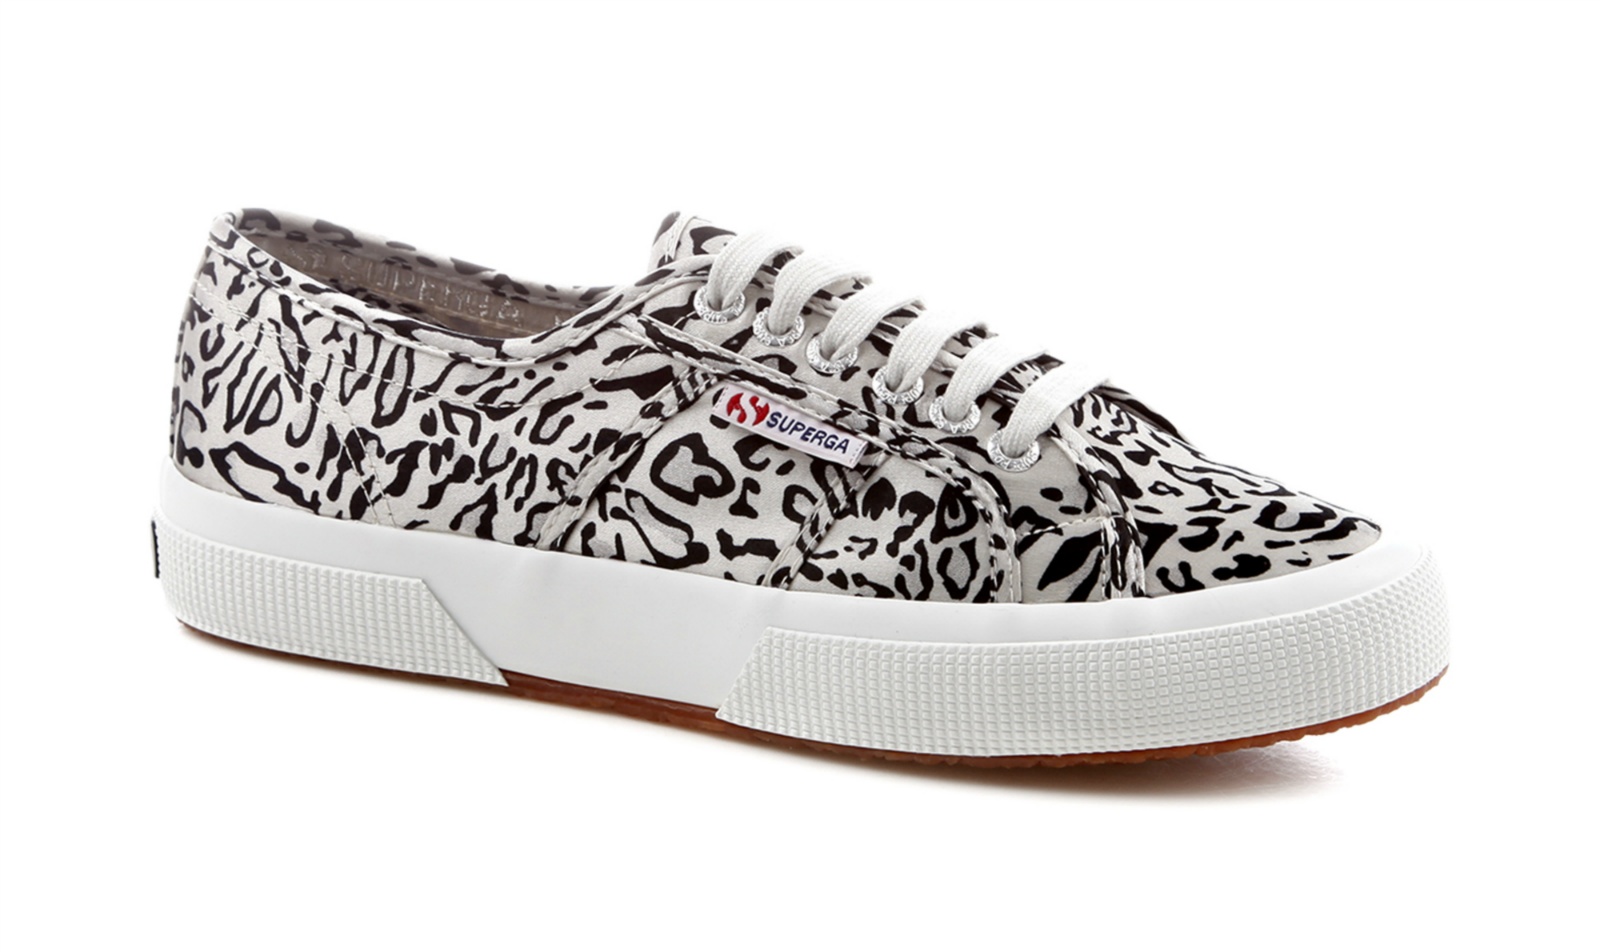 Superga: Comfy Sneakers Perfect for Summer